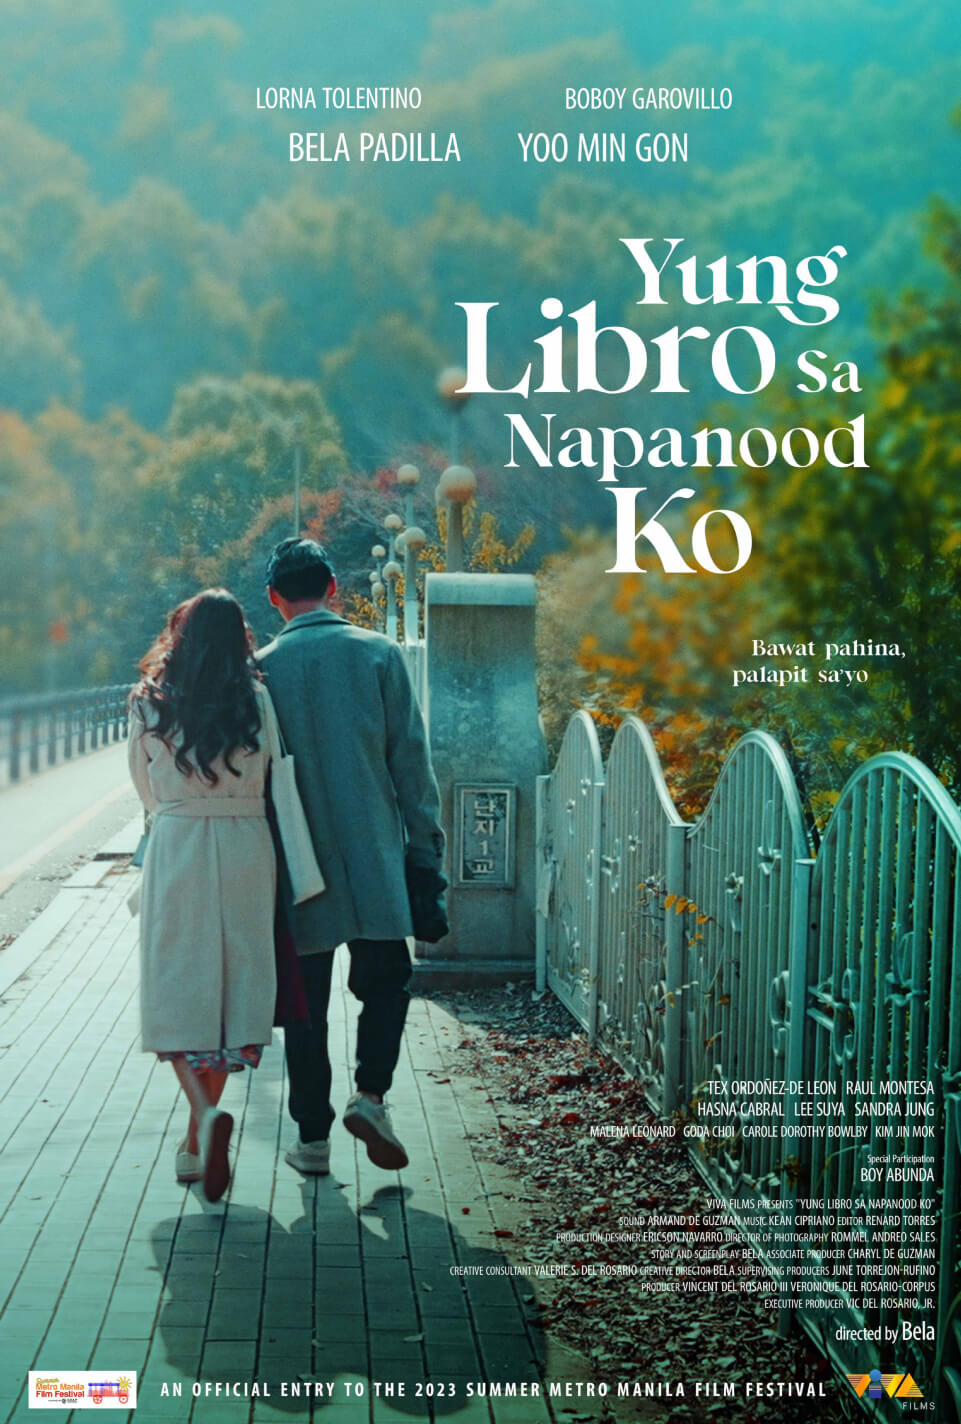 Yung Libro sa Napanood Ko Movie (2023) Cast, Release Date, Story, Budget, Collection, Poster, Trailer, Review